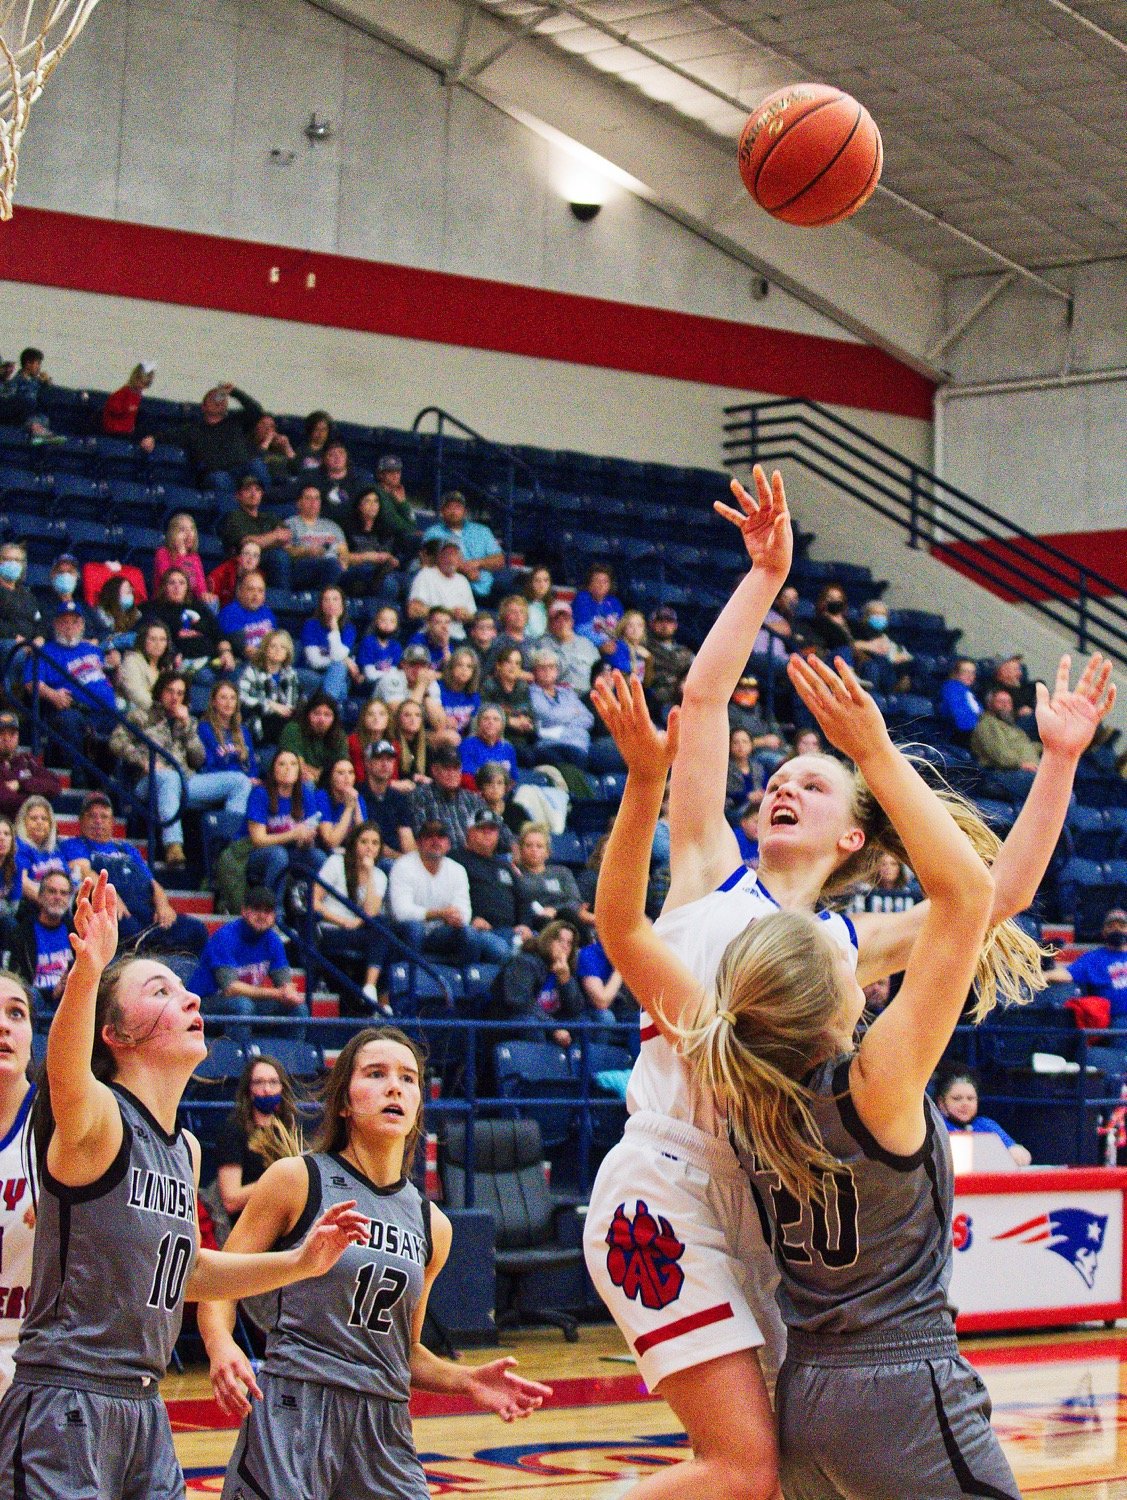 Bella Crawford puts up a floater after weaving through the Lady Knights in the lane. [see more shots, score prints]